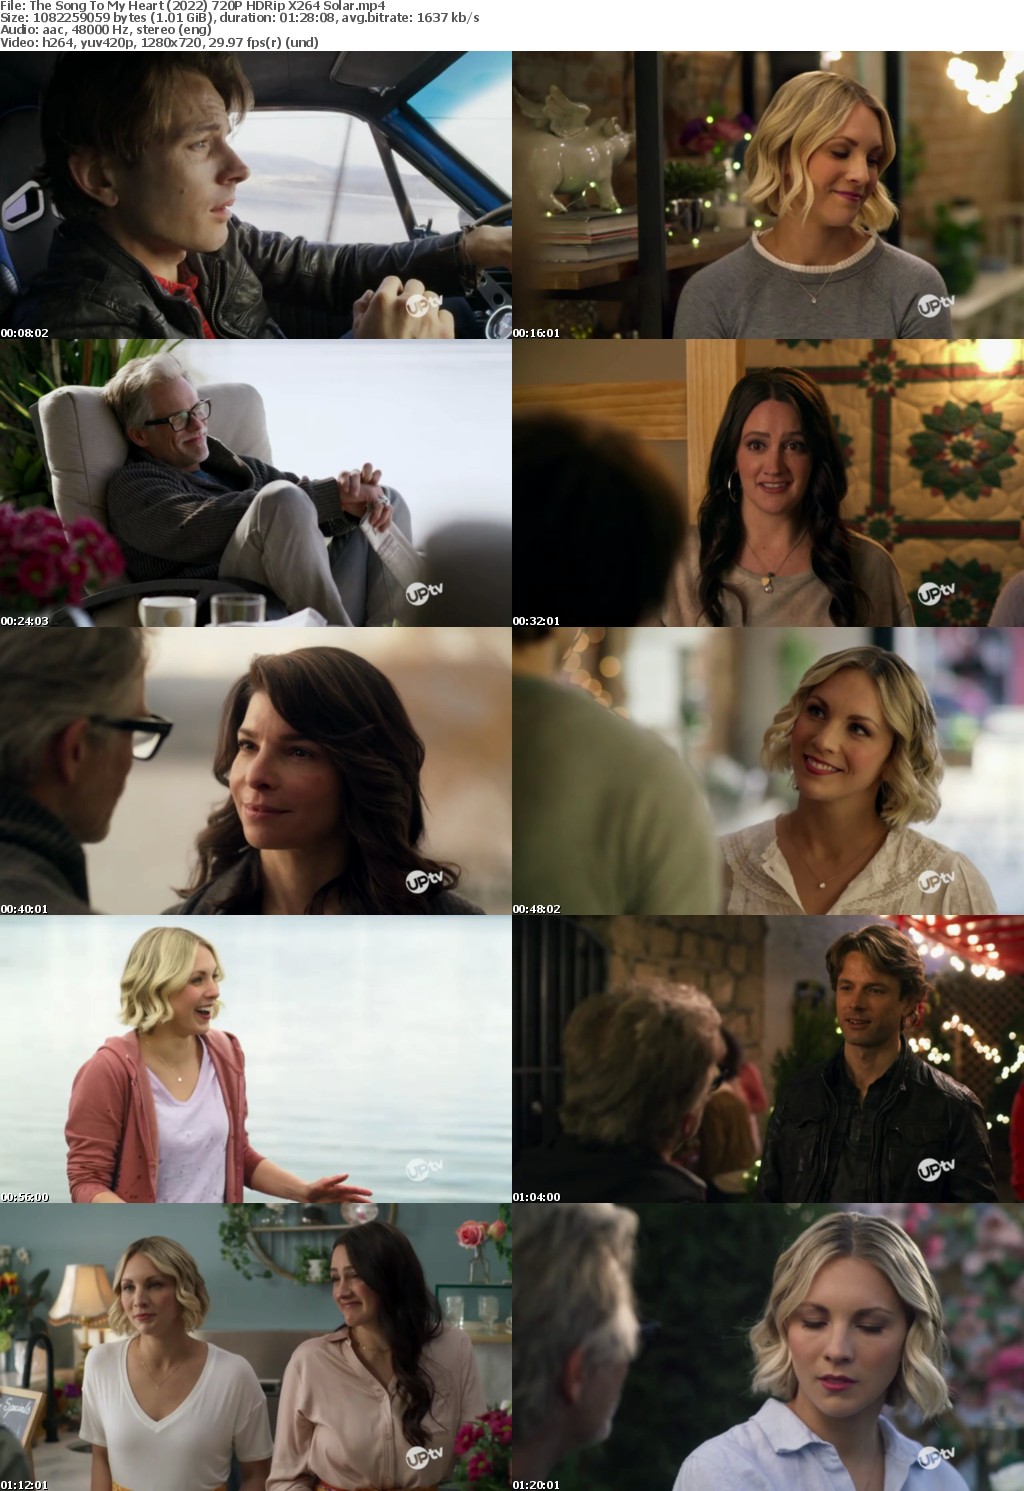 The Song To My Heart (2022) 720P HDRip X264 Solar